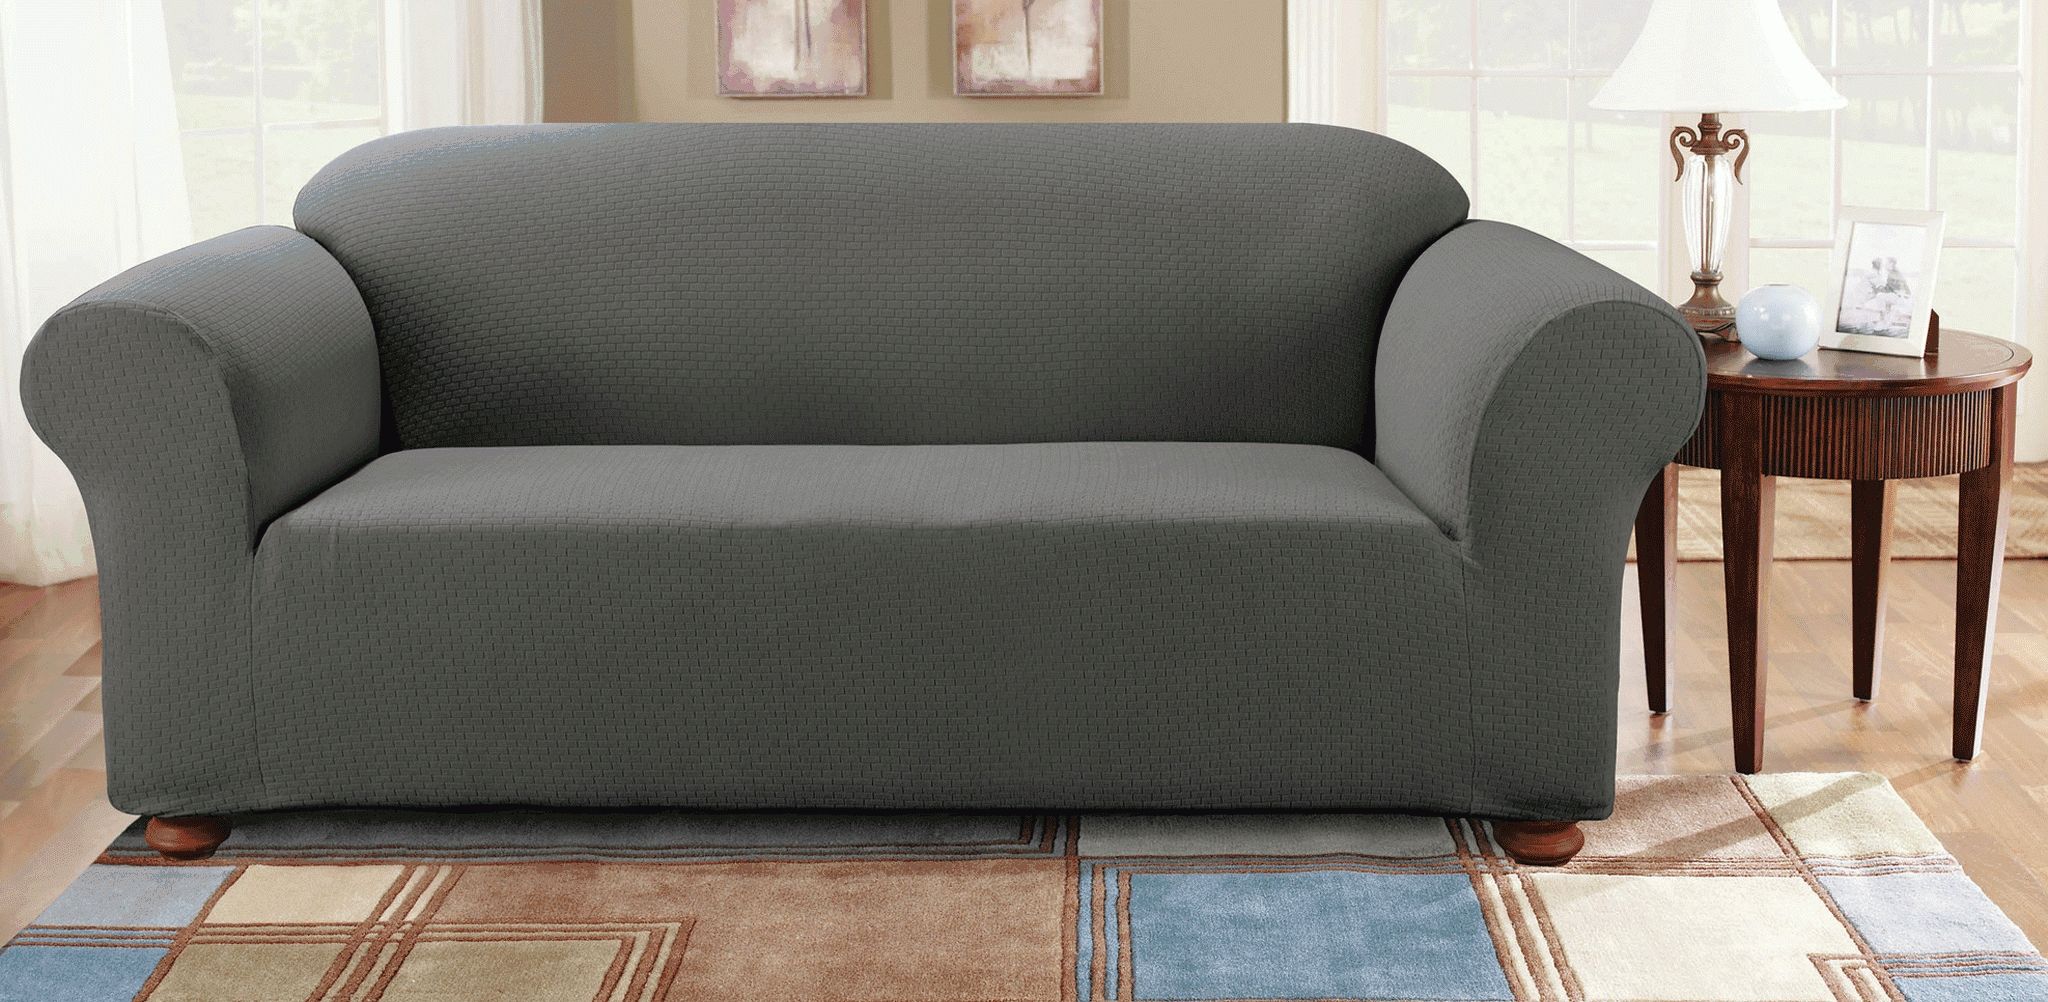 Furniture: Sofa Seat Covers | Couch Covers Walmart | Slipcovers In Chaise Sofa Covers (View 8 of 30)